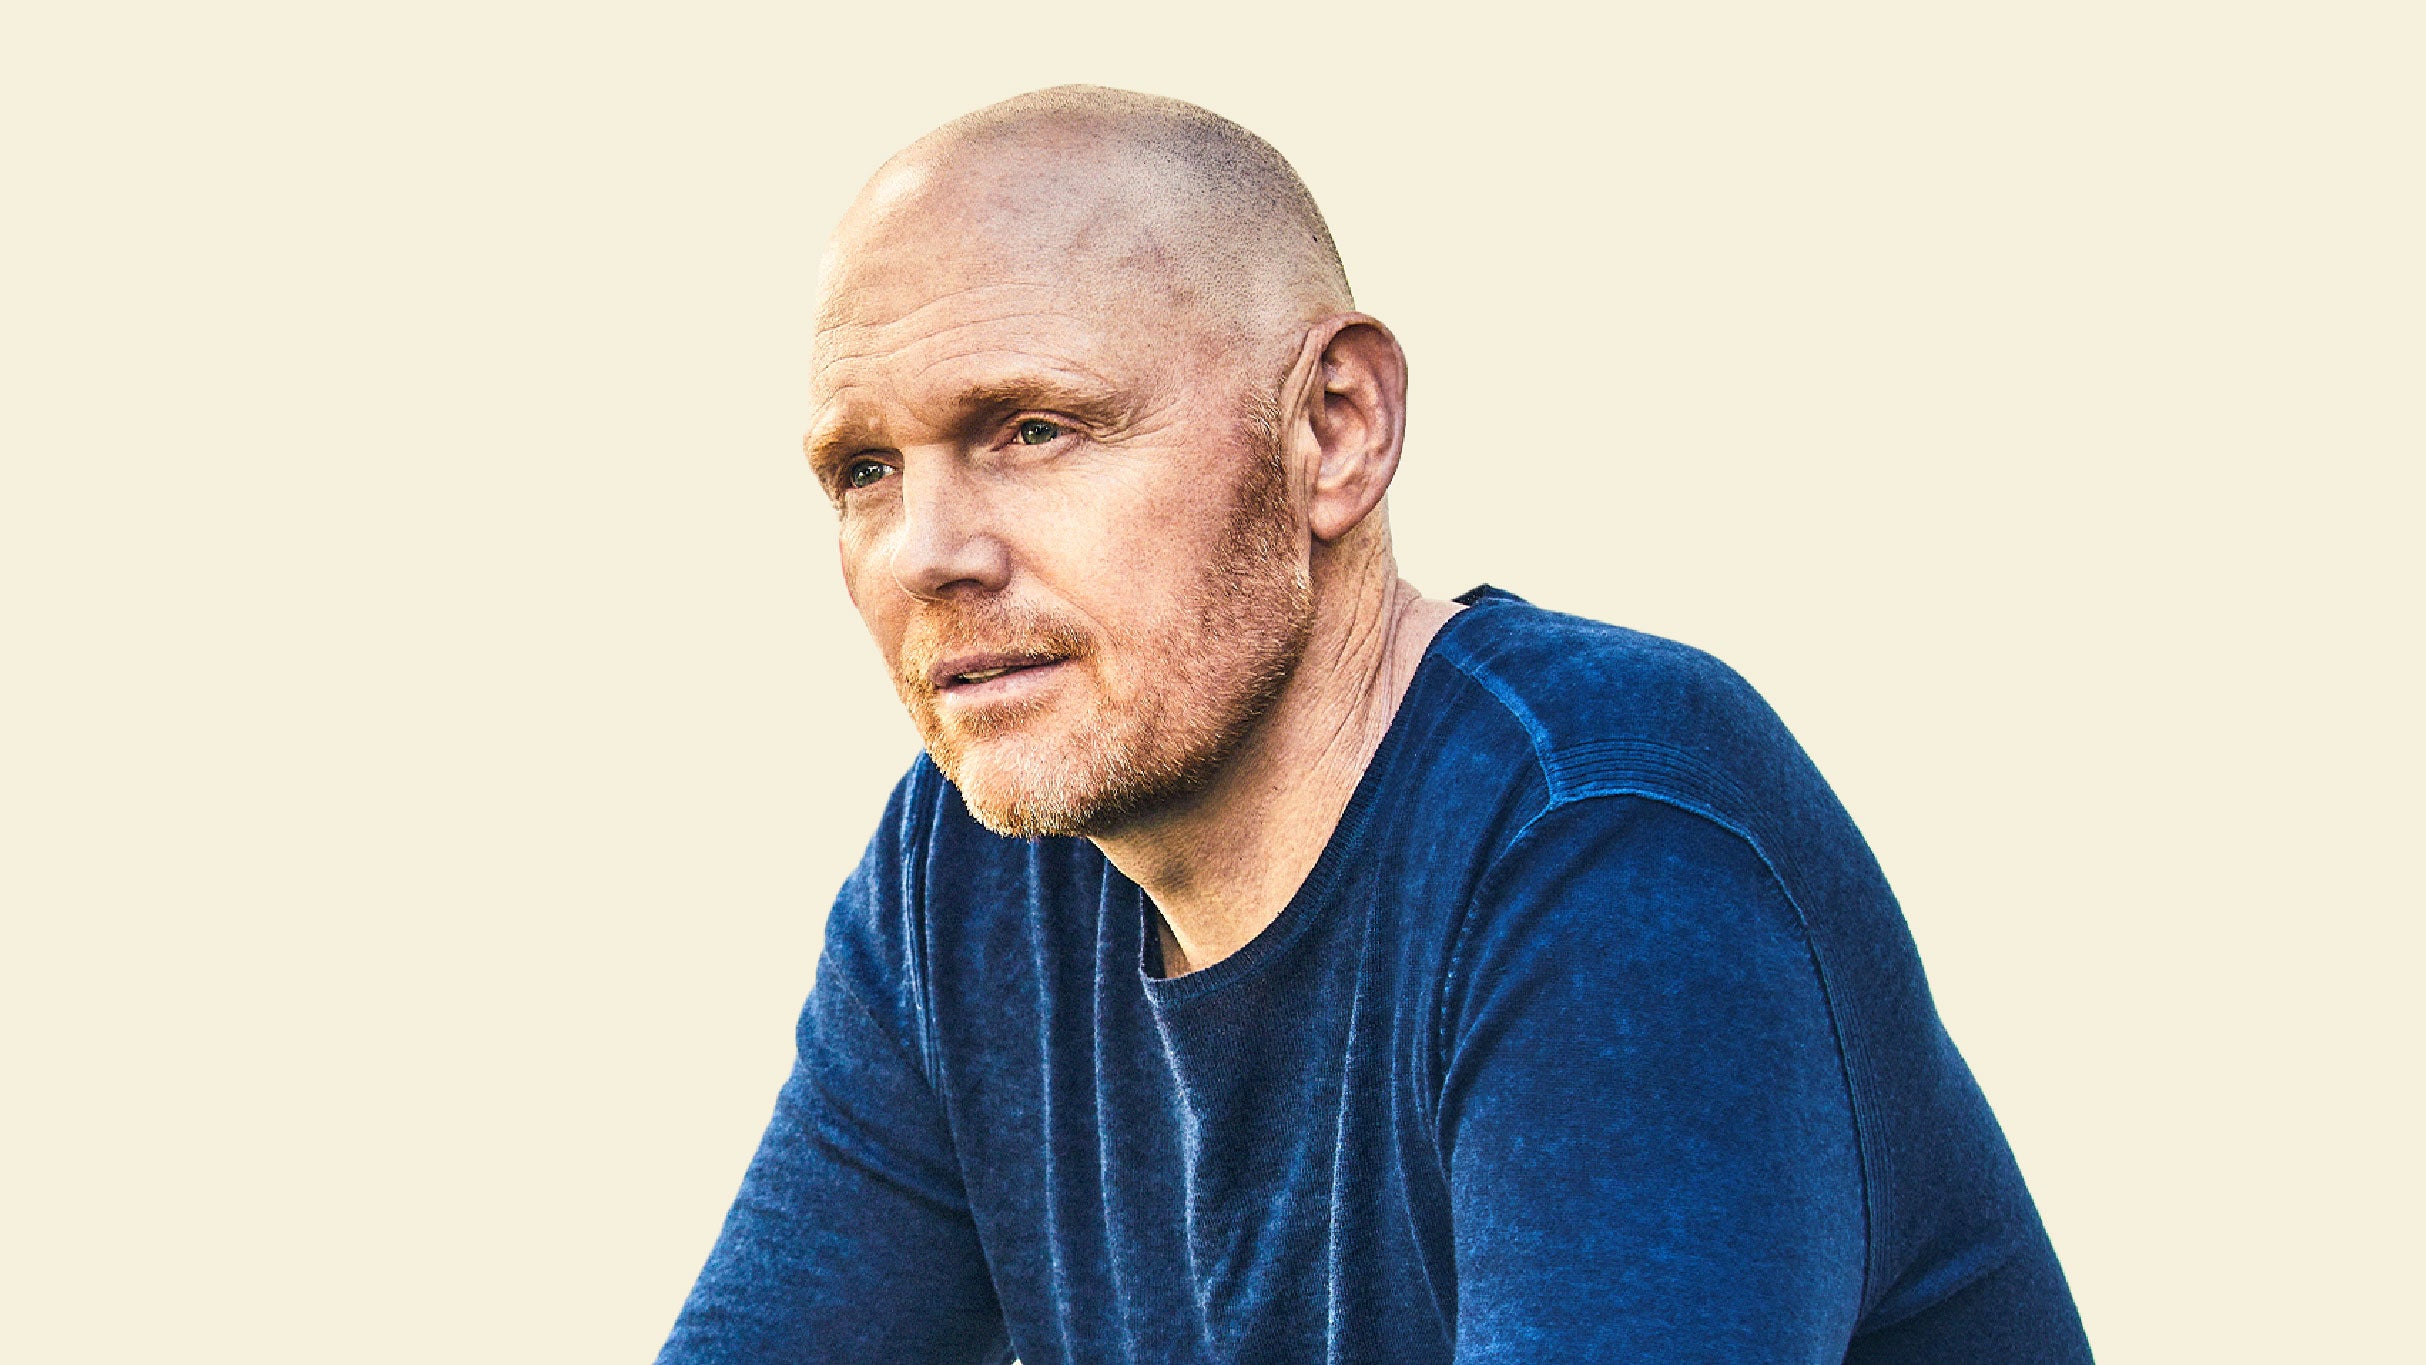 Bill Burr Live free presale code for show tickets in Mashantucket, CT (Premier Theater at Foxwoods Resort Casino)